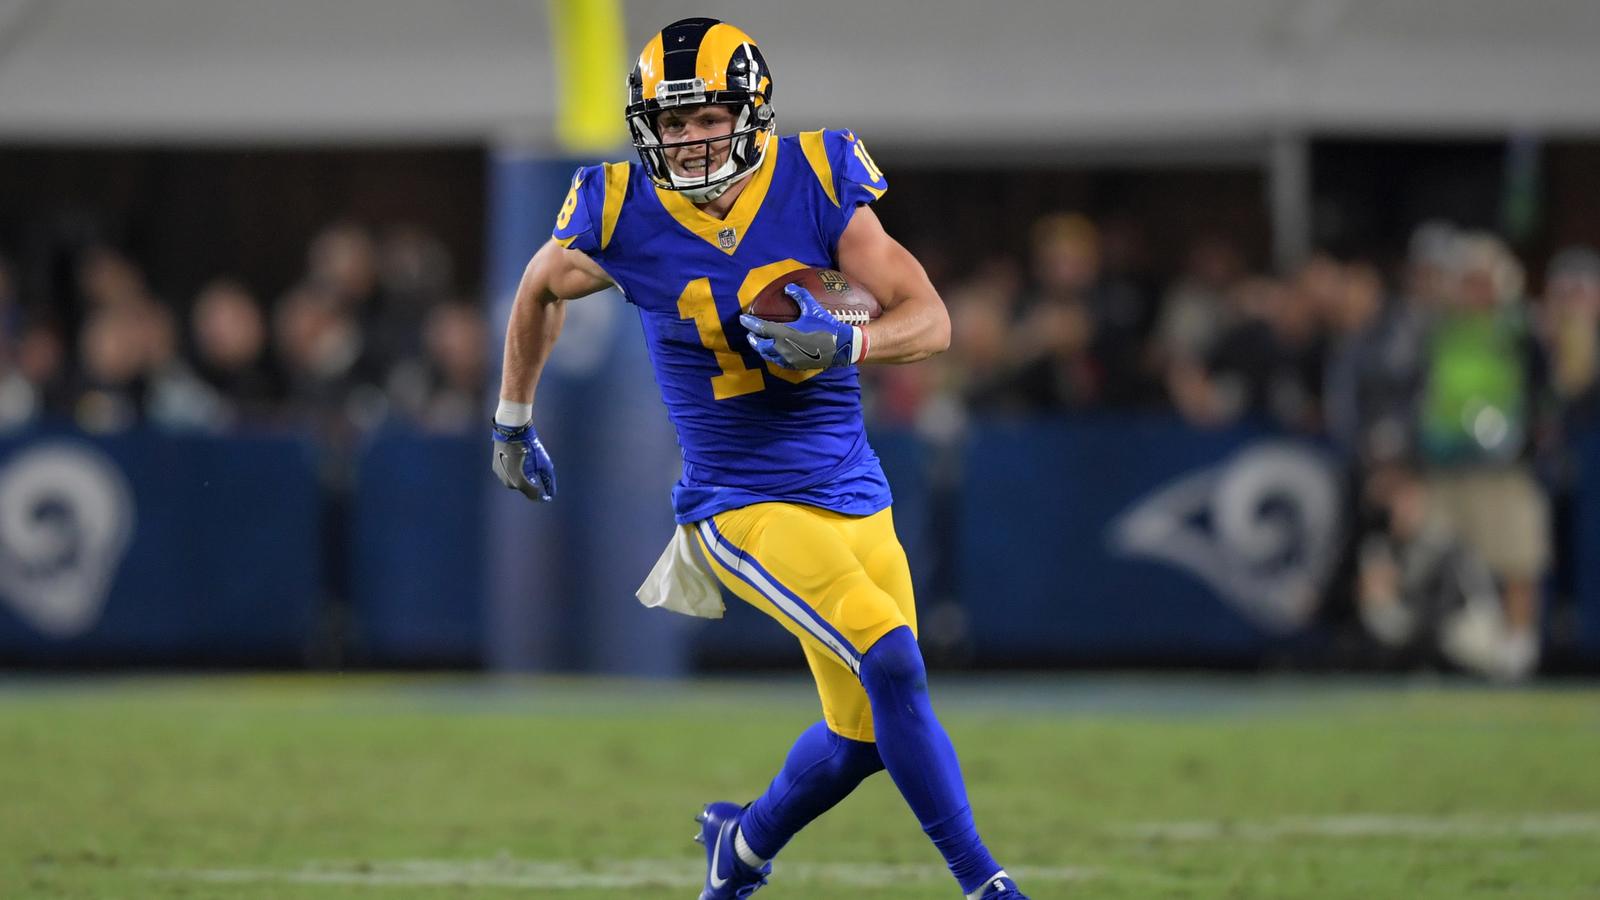 Twitter reacts to Cooper Kupp returning to game after being